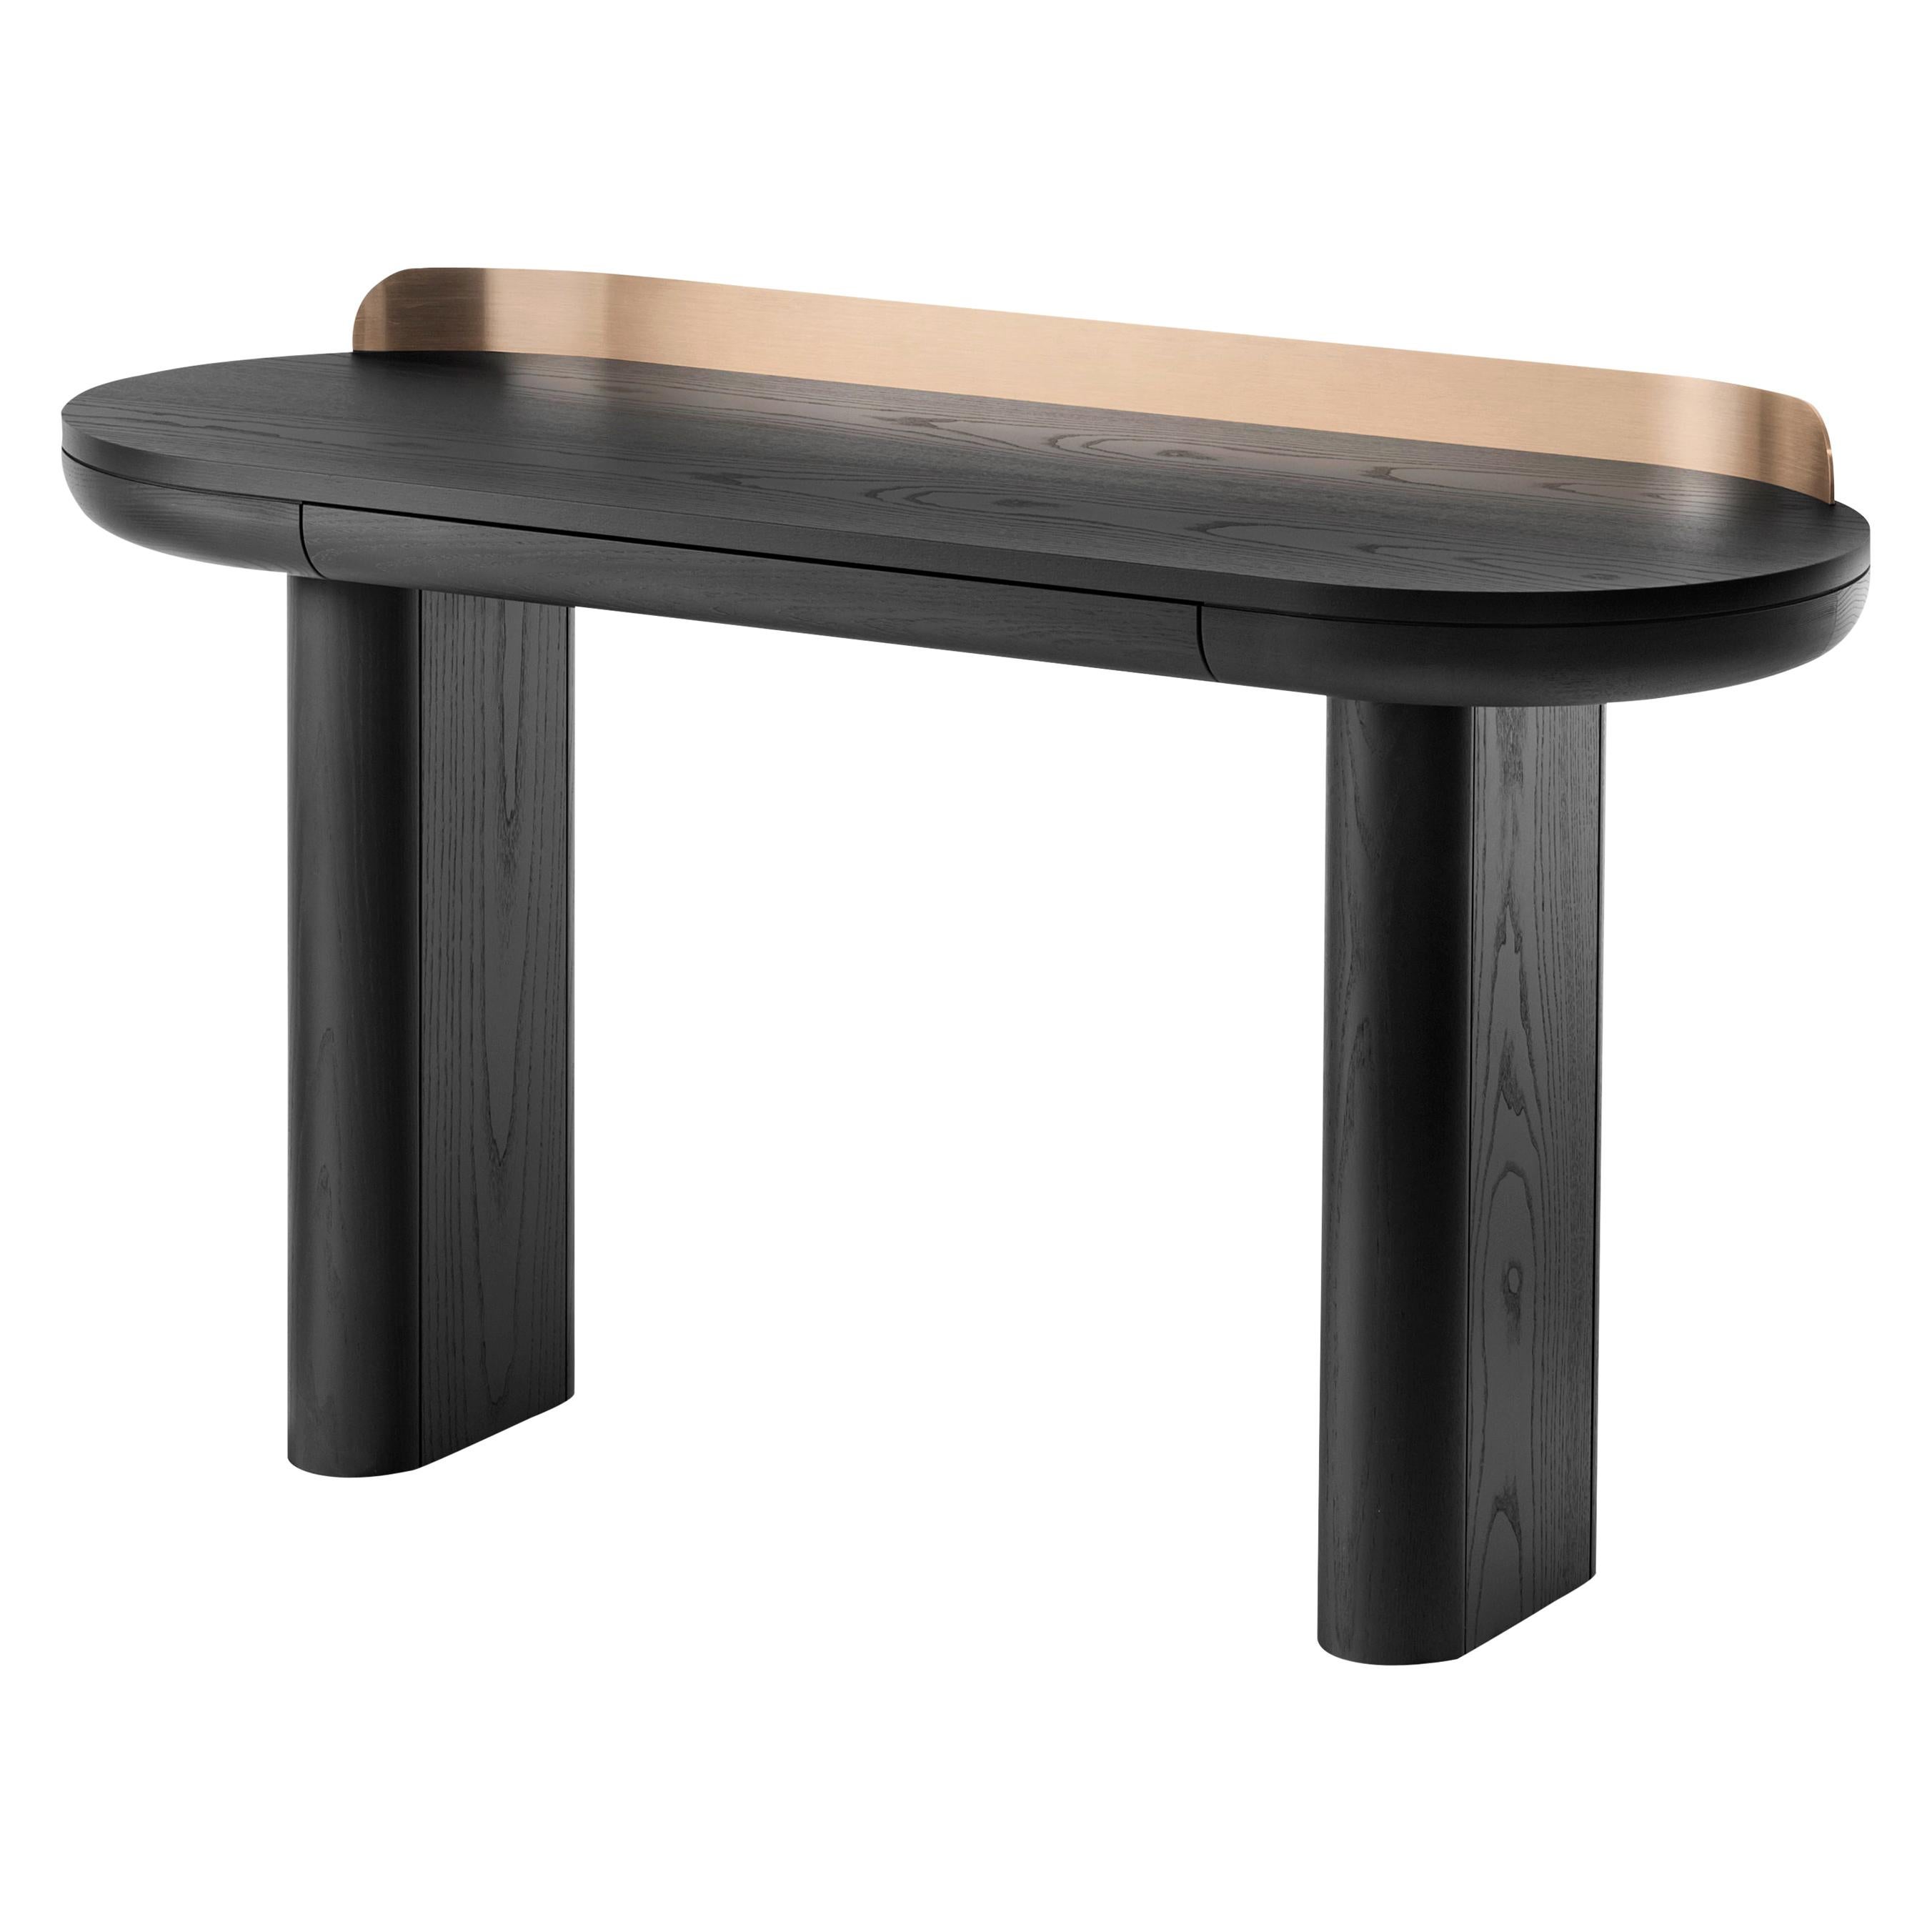 Jumbo Table with Structure in Black Ash, by Paolo Cappello